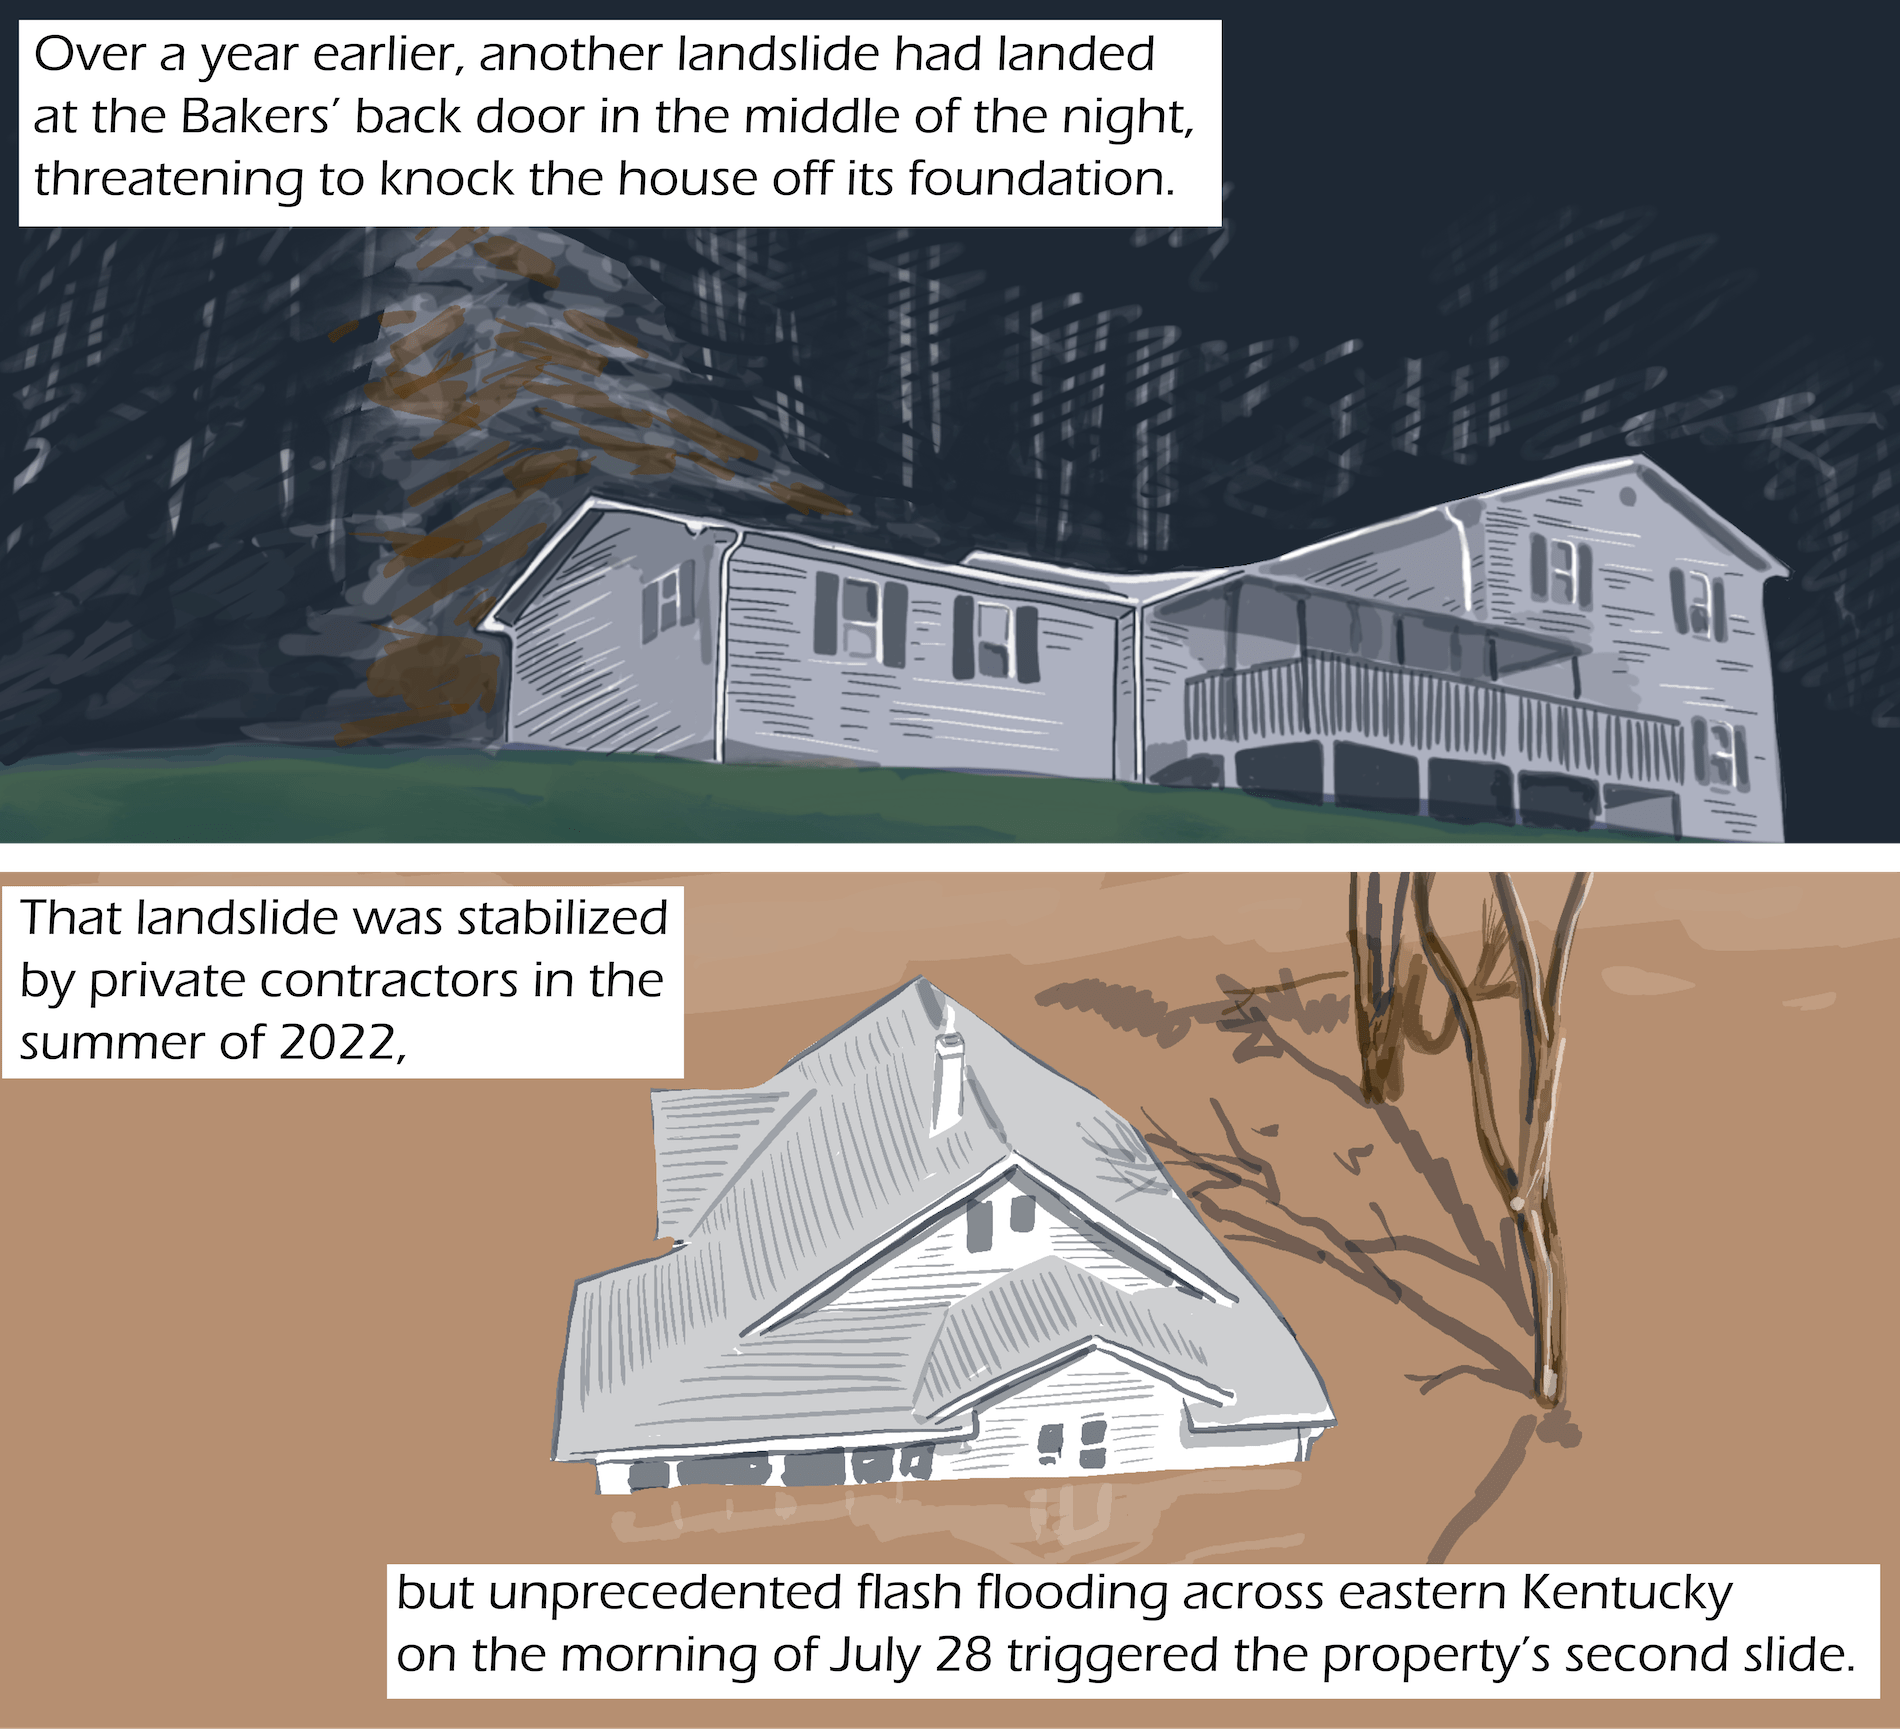 Top image: A house in the rain in the dark. Text: Over a year earlier, another landslide had landed at the Bakers’ back door in the middle of the night, threatening to knock the house off its foundation. Bottom image: The same house in an aerial view, now it's submerged in brown mud. Text: The landslide was stabilized by private contractors in the summer of 2022, but unprecedented flash flooding across eastern Kentucky on the morning of July 28 triggered the property’s second slide.